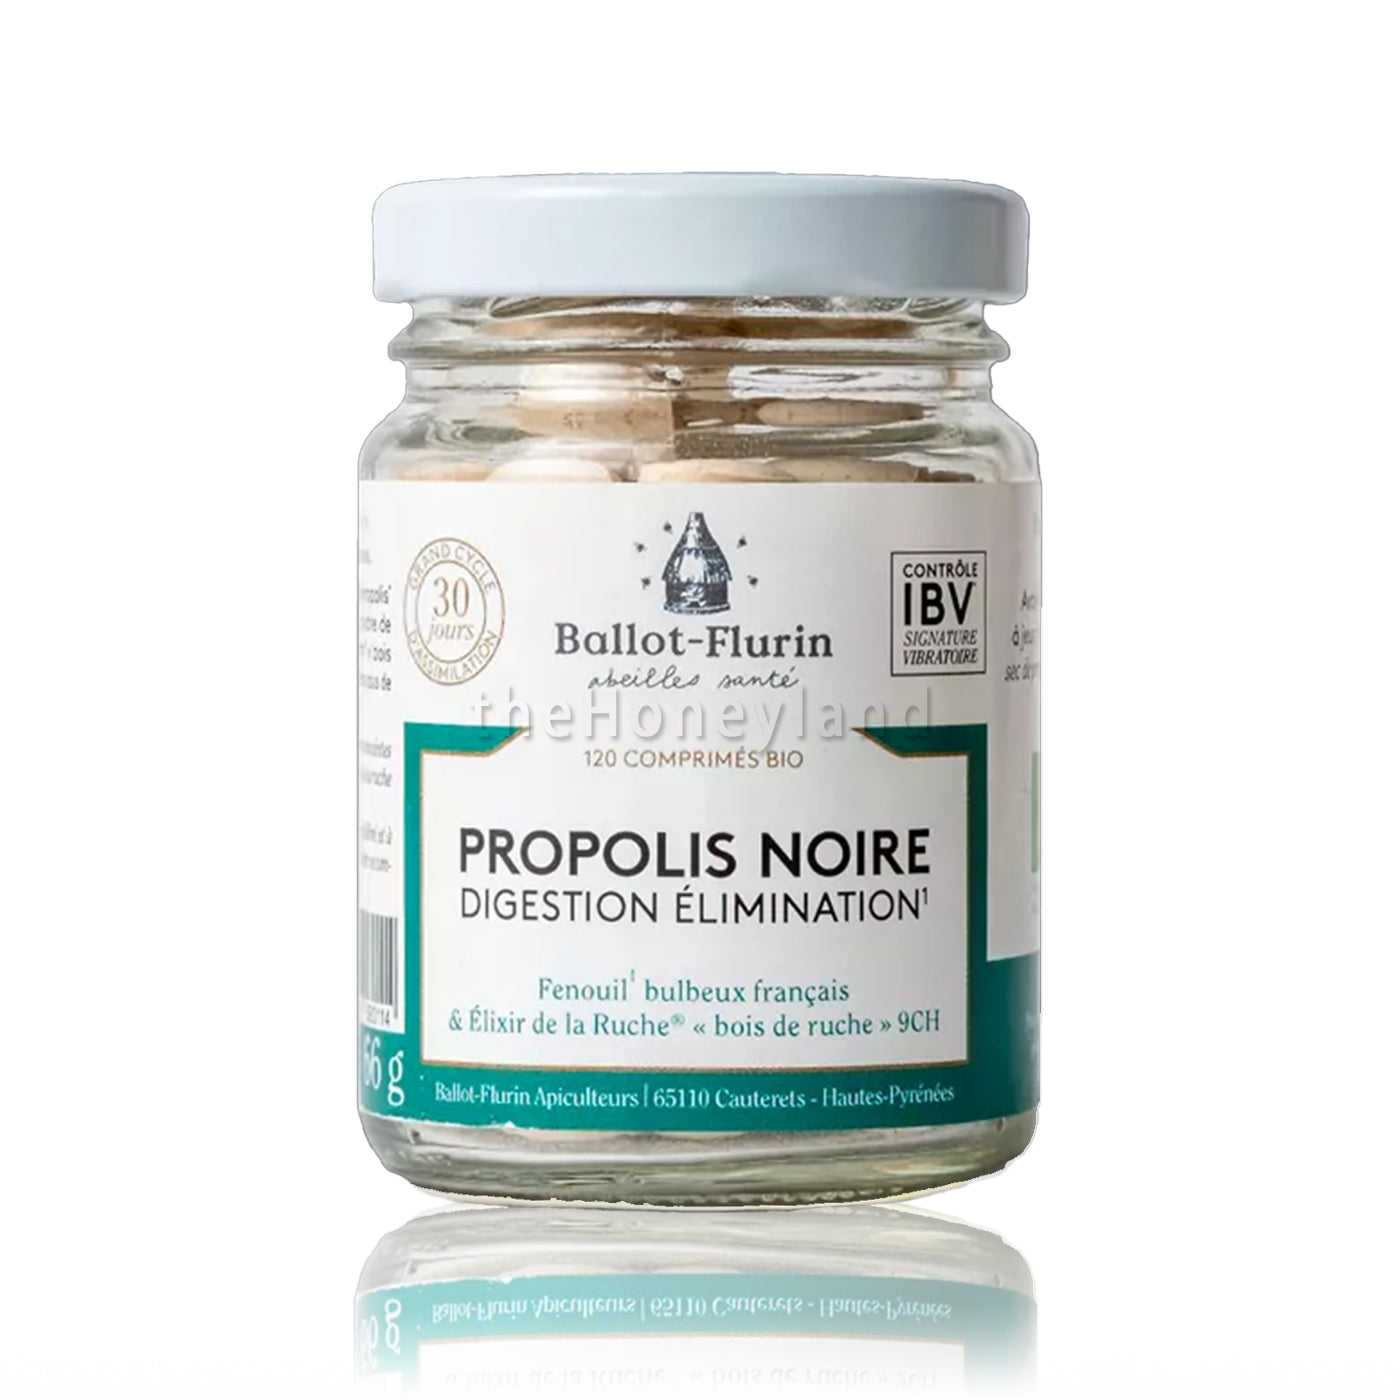 Organic Propolis for the digestive tract